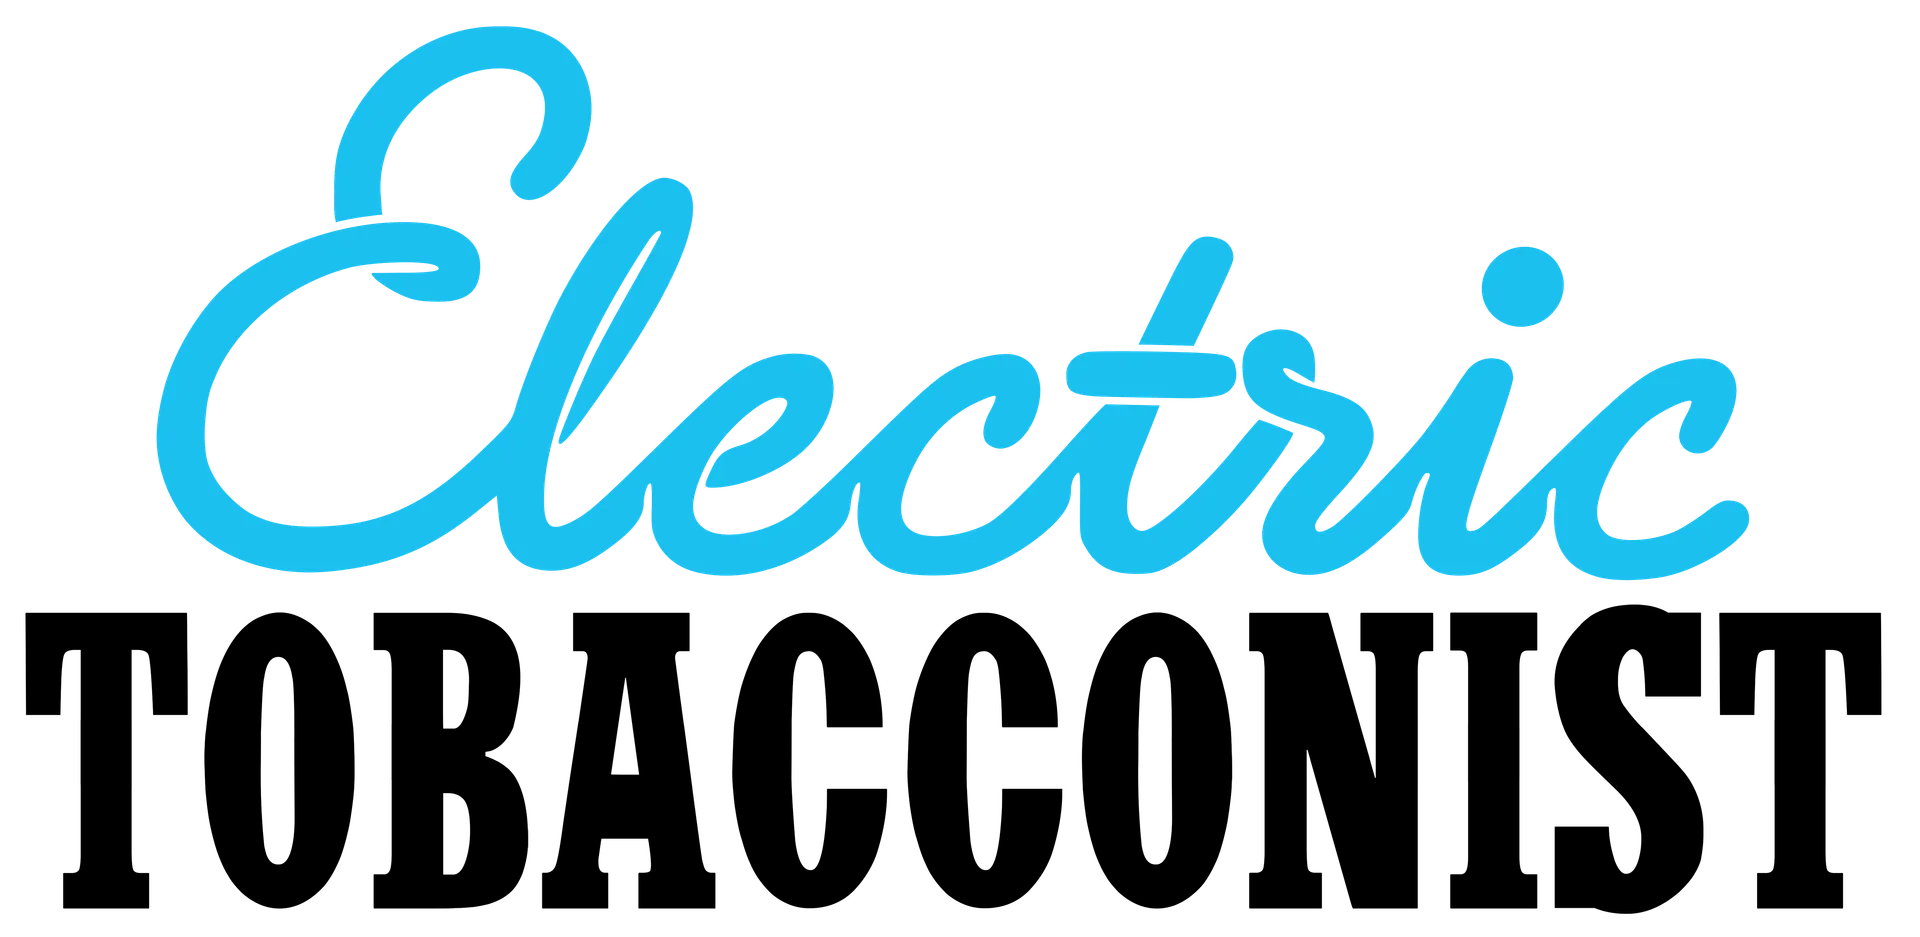 ELECTRIC TOBACCONIST logo. Current catalogue